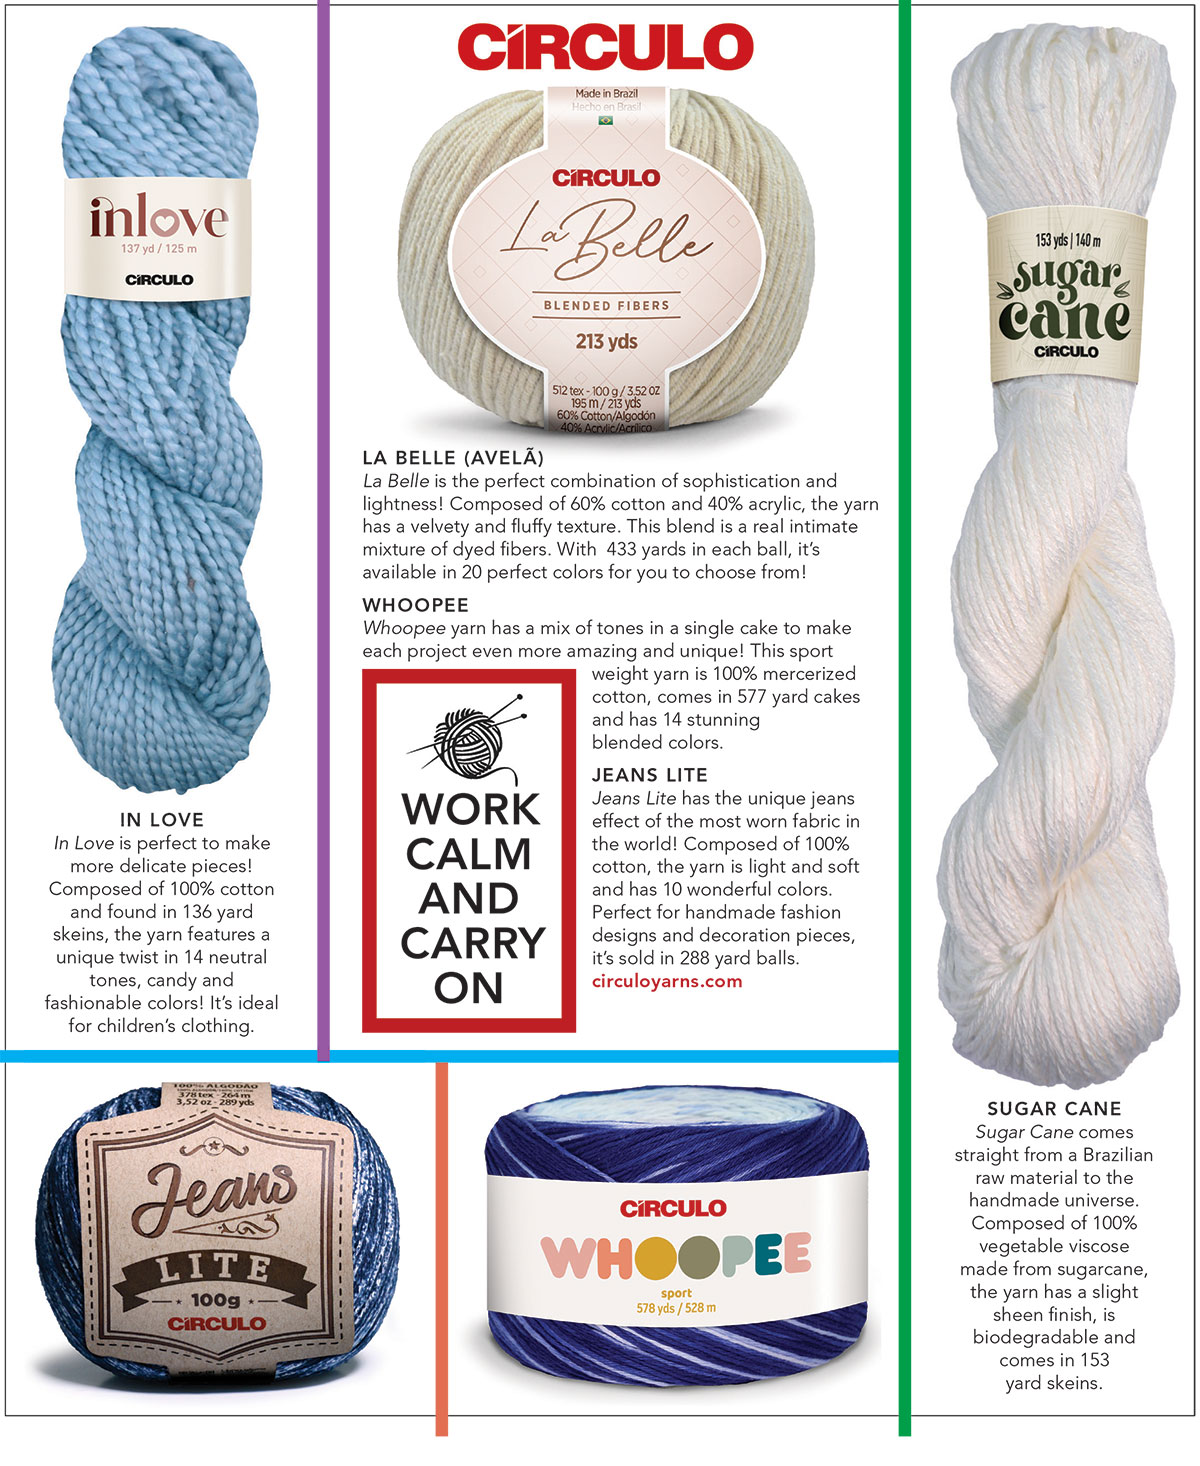 Work Calm and Carry On - Vogue Knitting Magazine